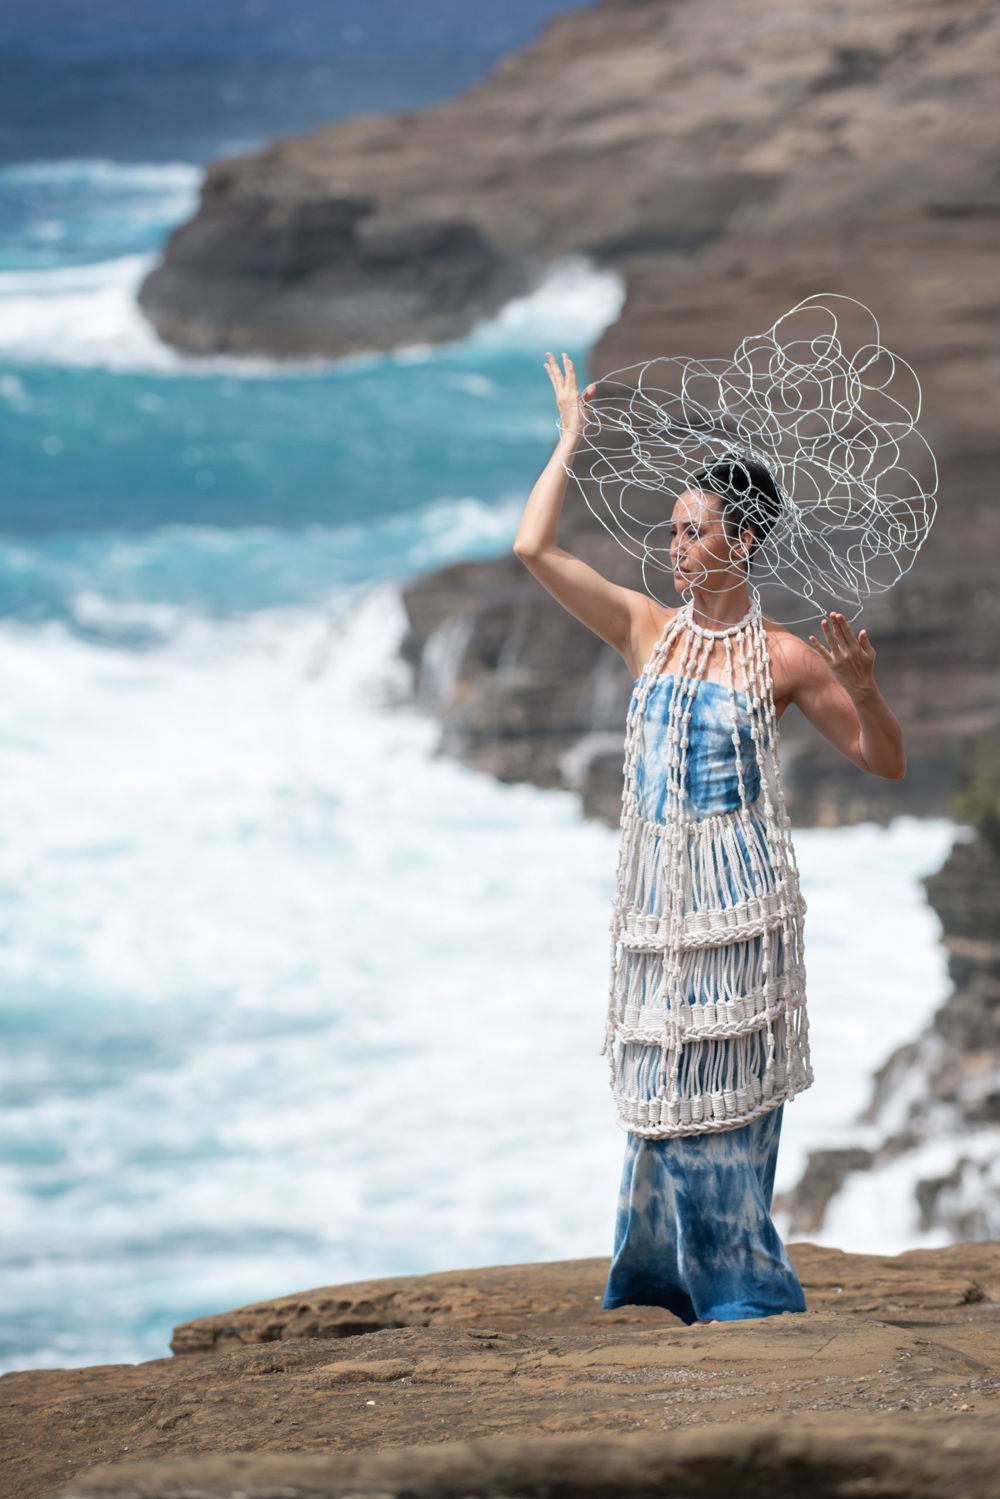 Photo of a woman standing on rocks by the waterfront wearing a white-and-blue foot-length dress. A white woven garment hangs from her neck and descends just past her knees, showing the dyed fabric underneath. Delicate loops of wire form a cloud around her head which she holds up with her hands.